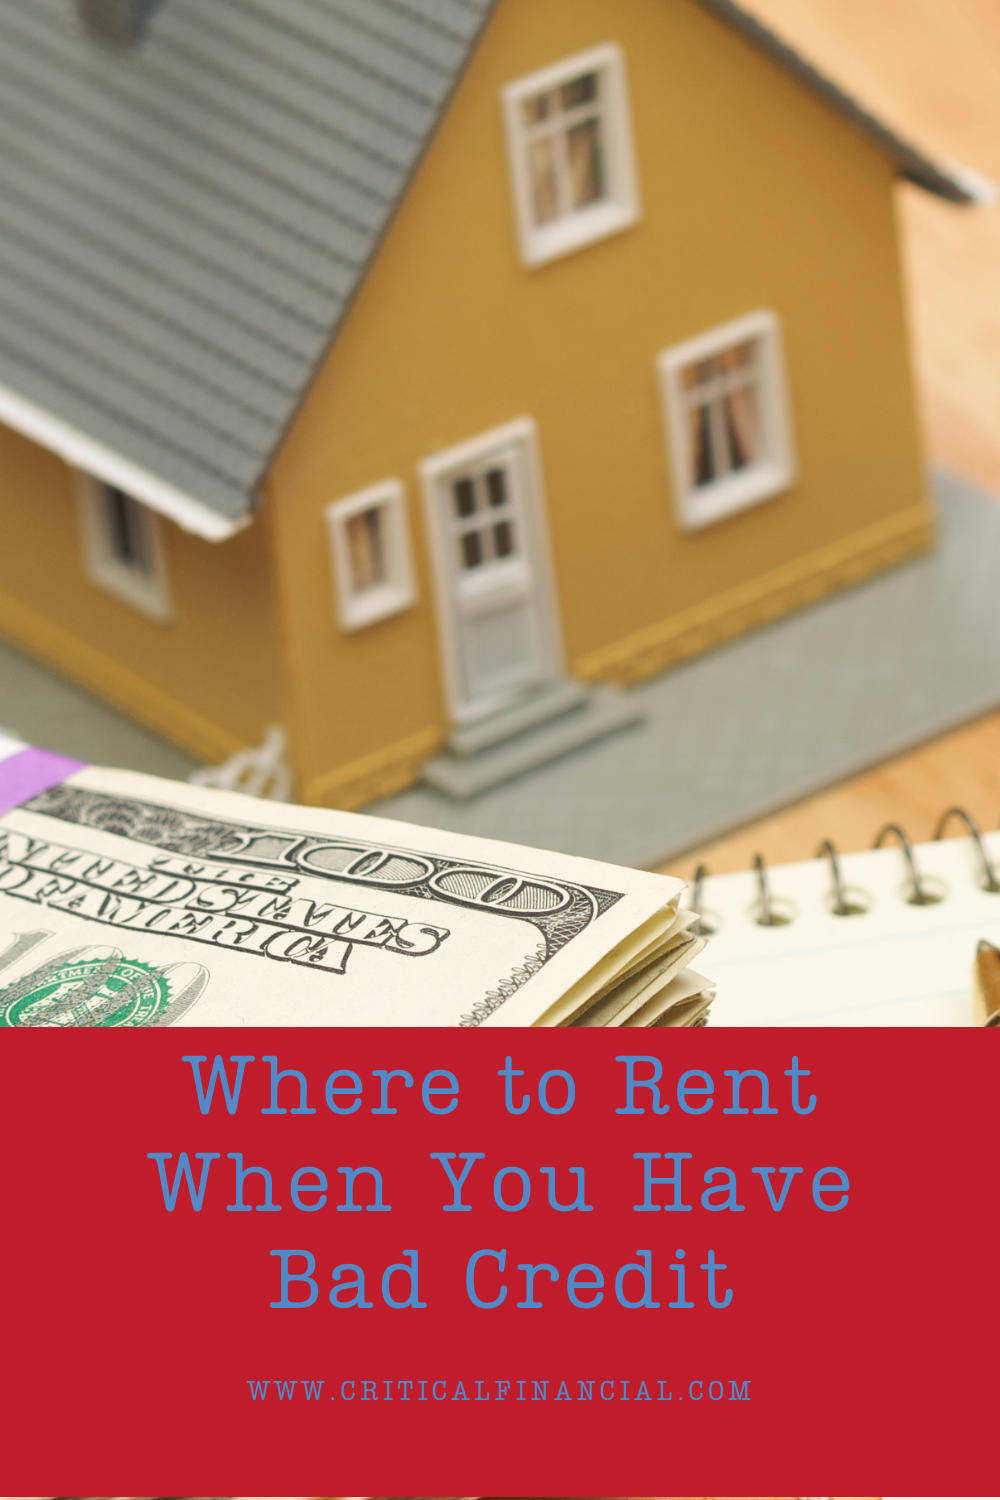 Where to Rent When You Have Bad Credit